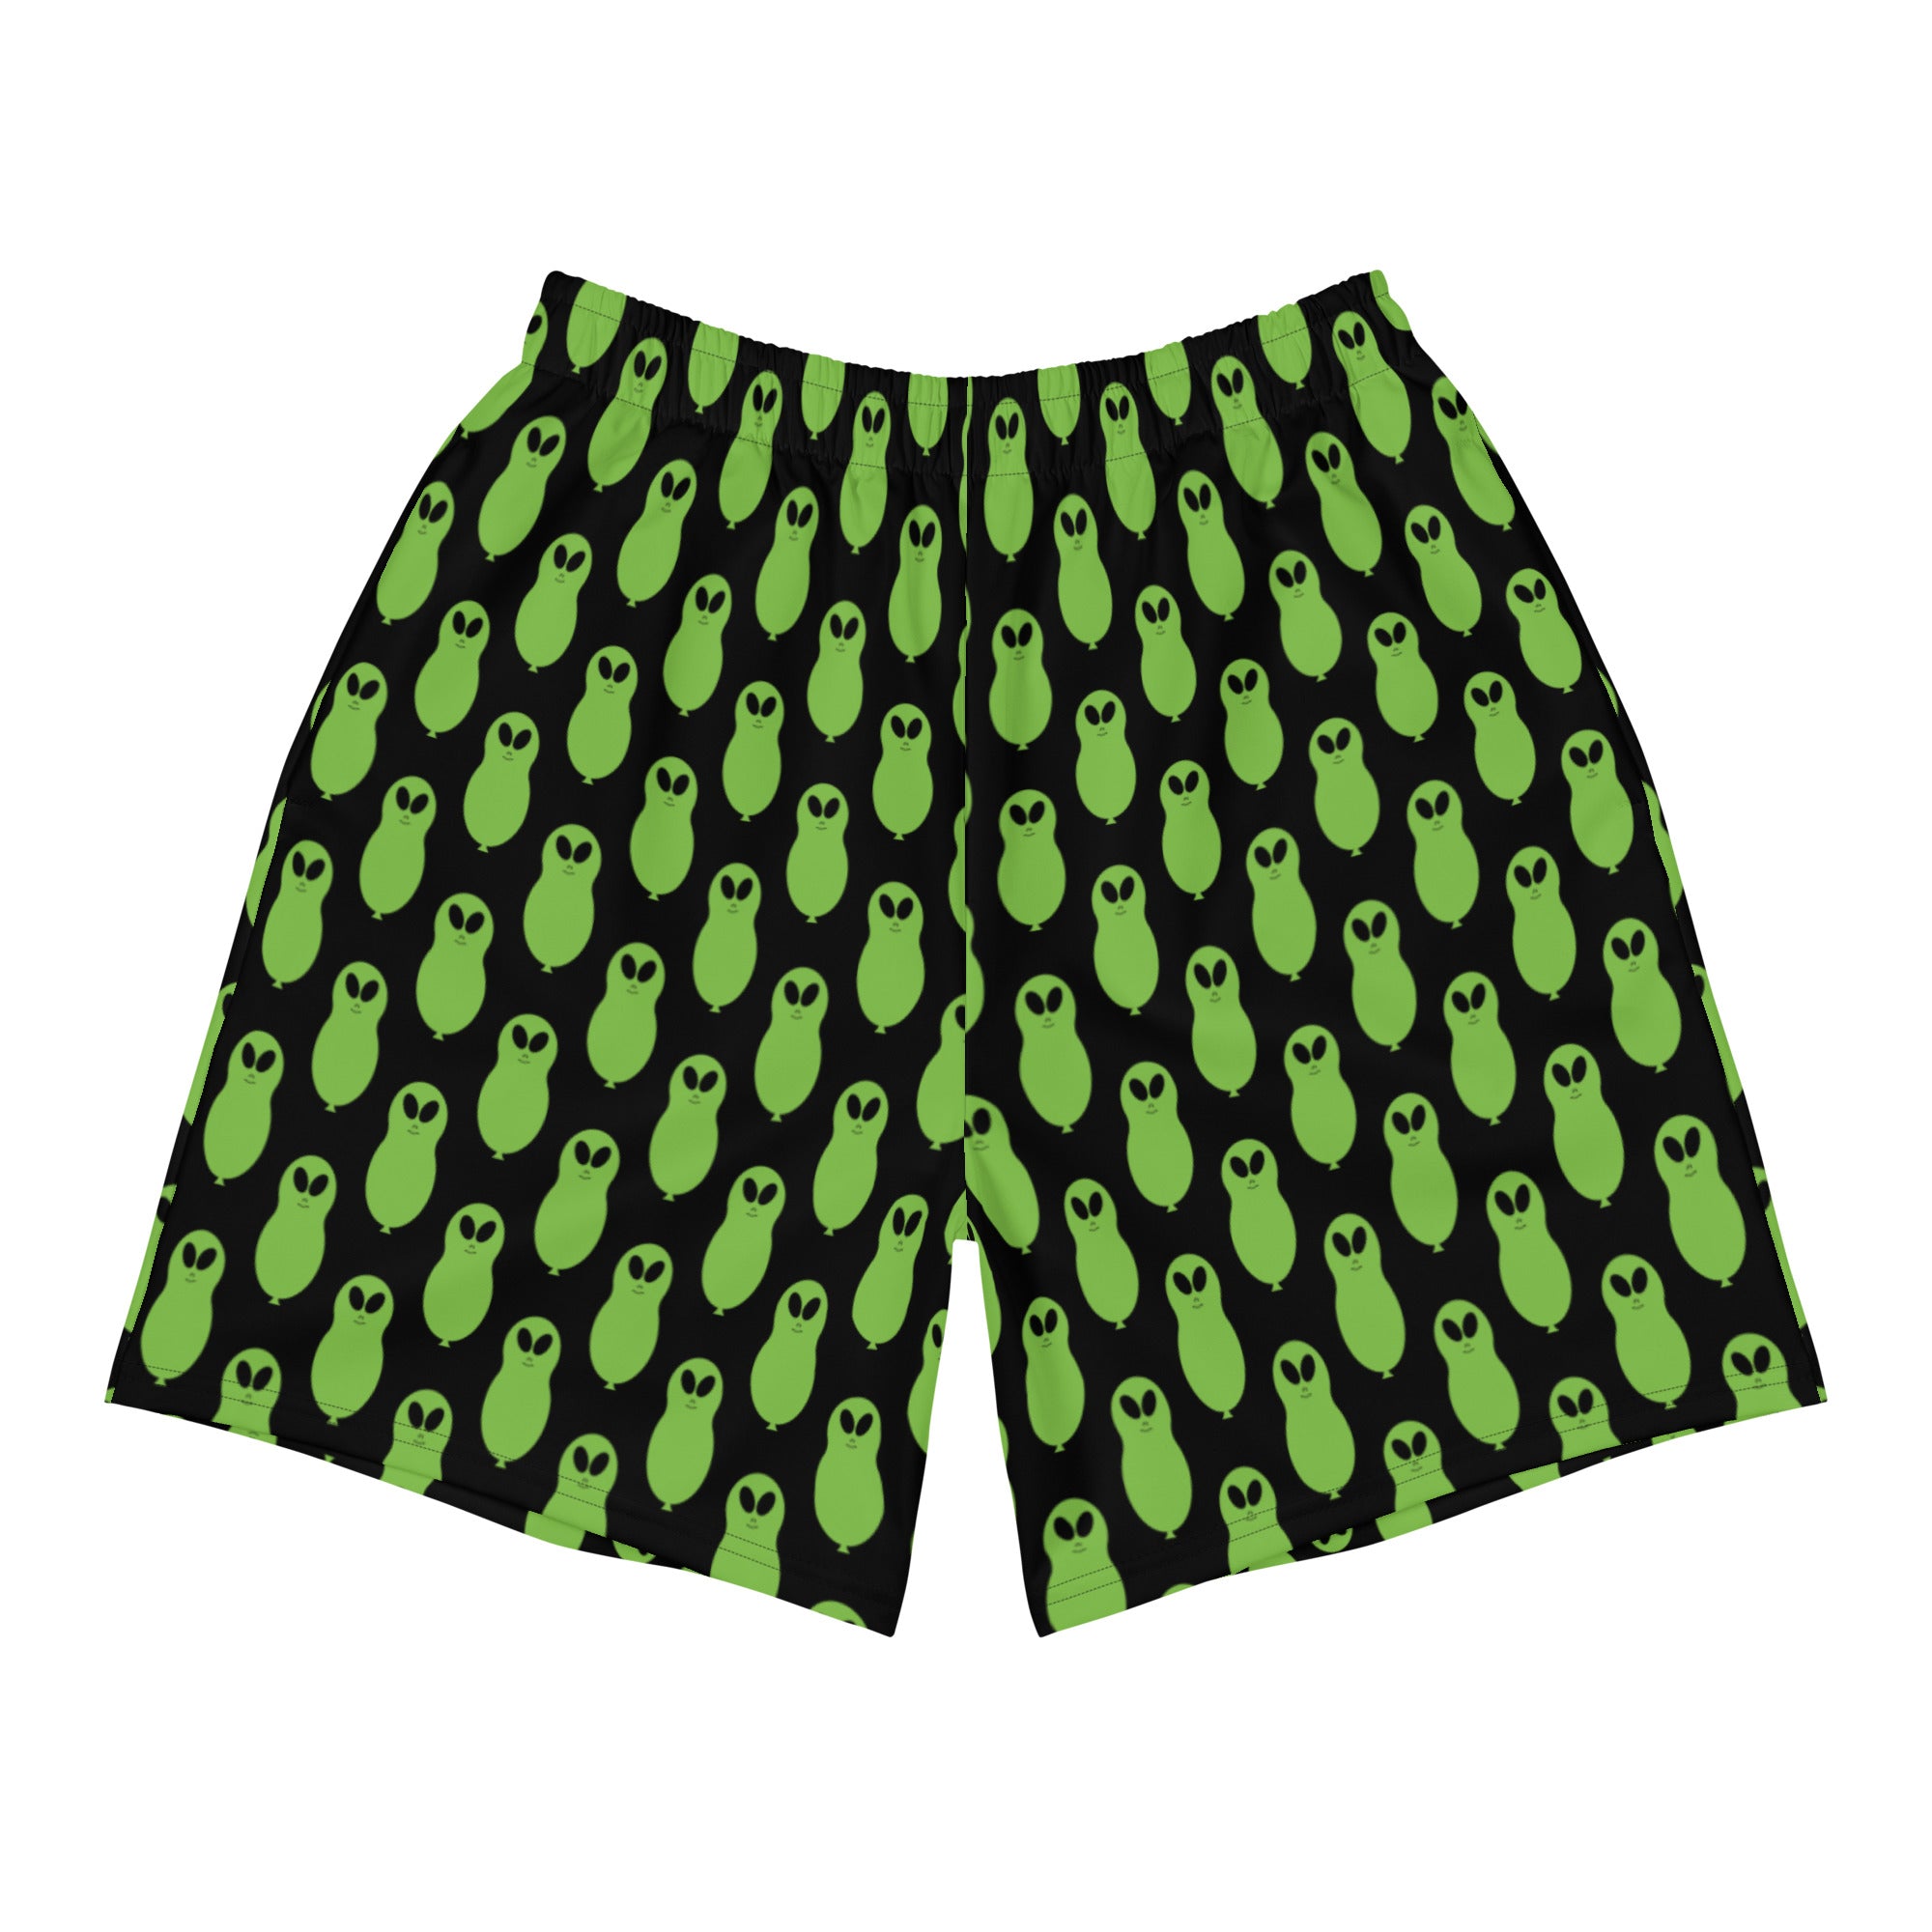 Kevin Balloon Men's Recycled Athletic Shorts